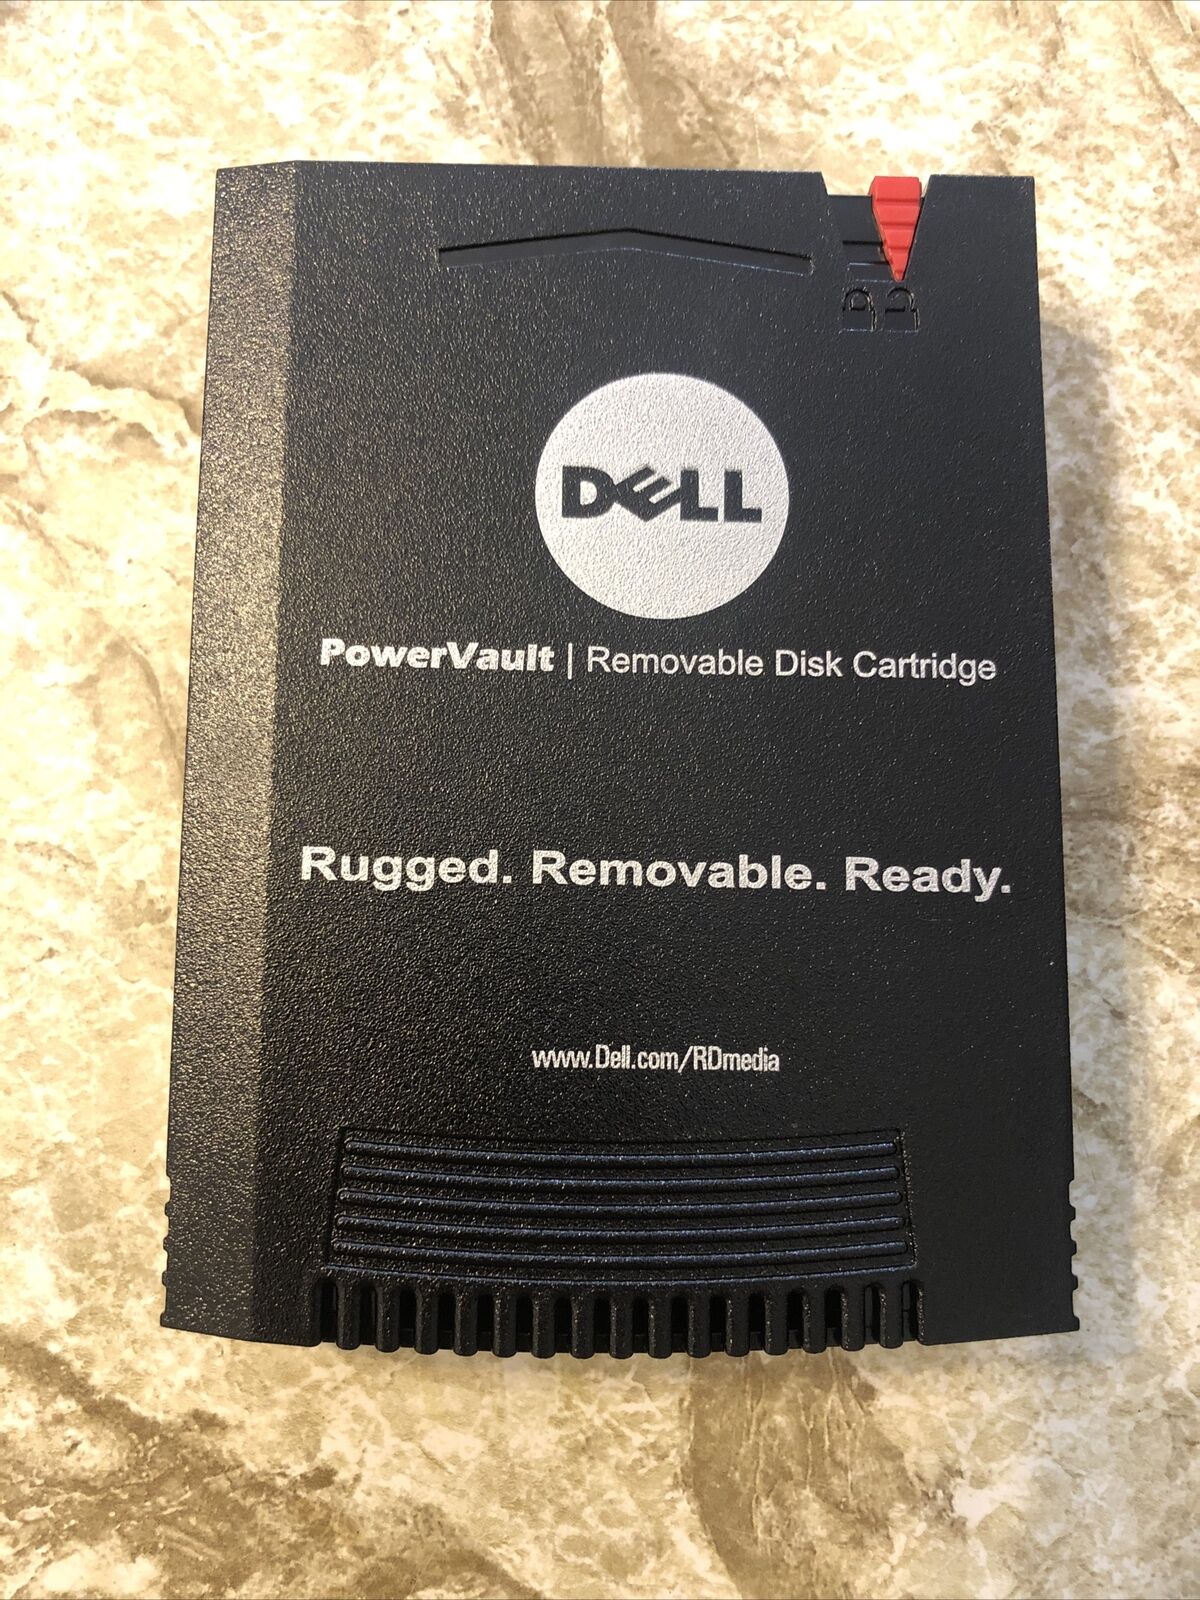 Dell 320 Gb Capacity Rd1000 Data Cartridge Powervault Removable